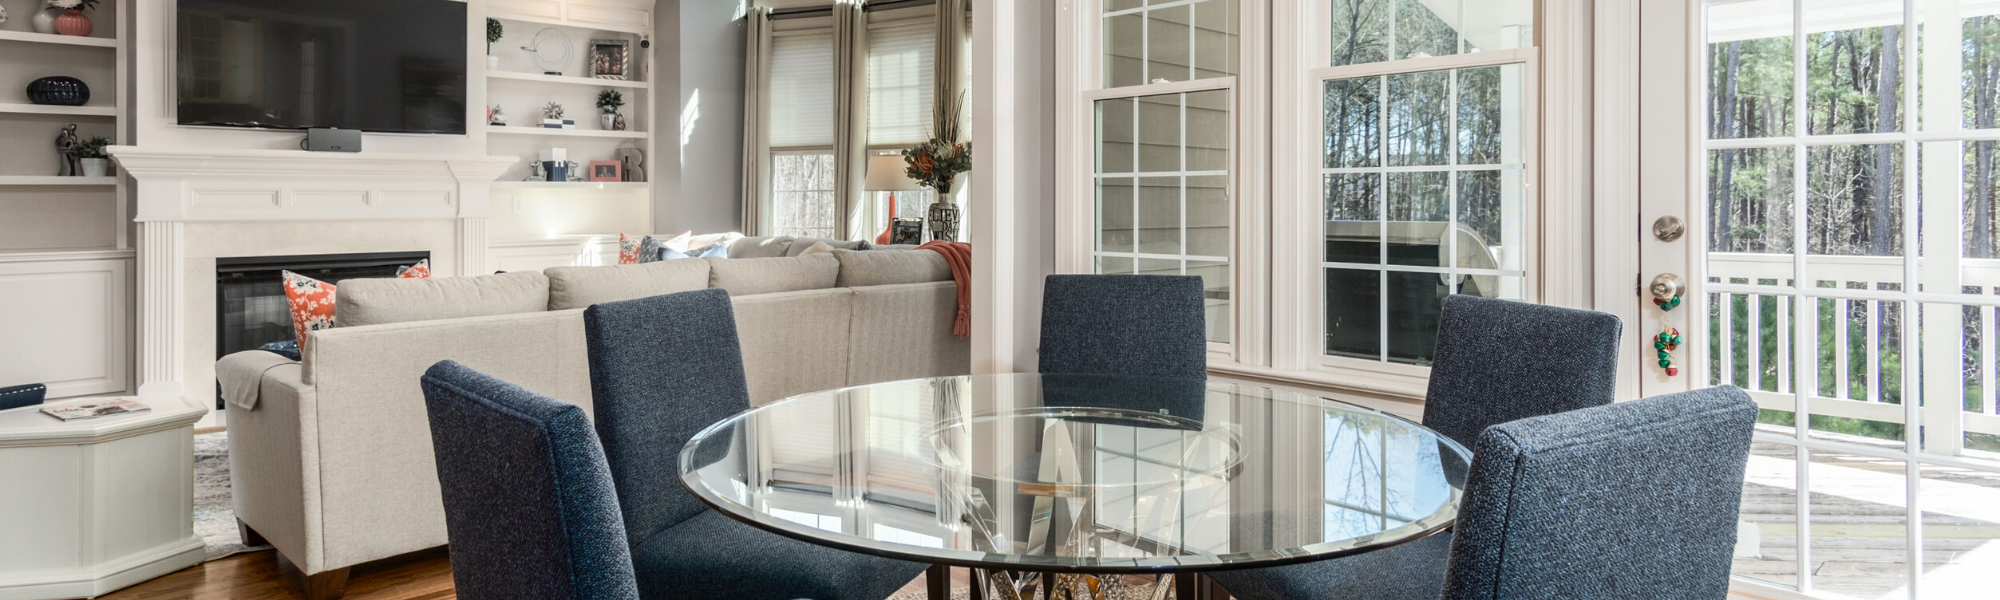 Information for buyers header image showing a nicely staged living and dining room.